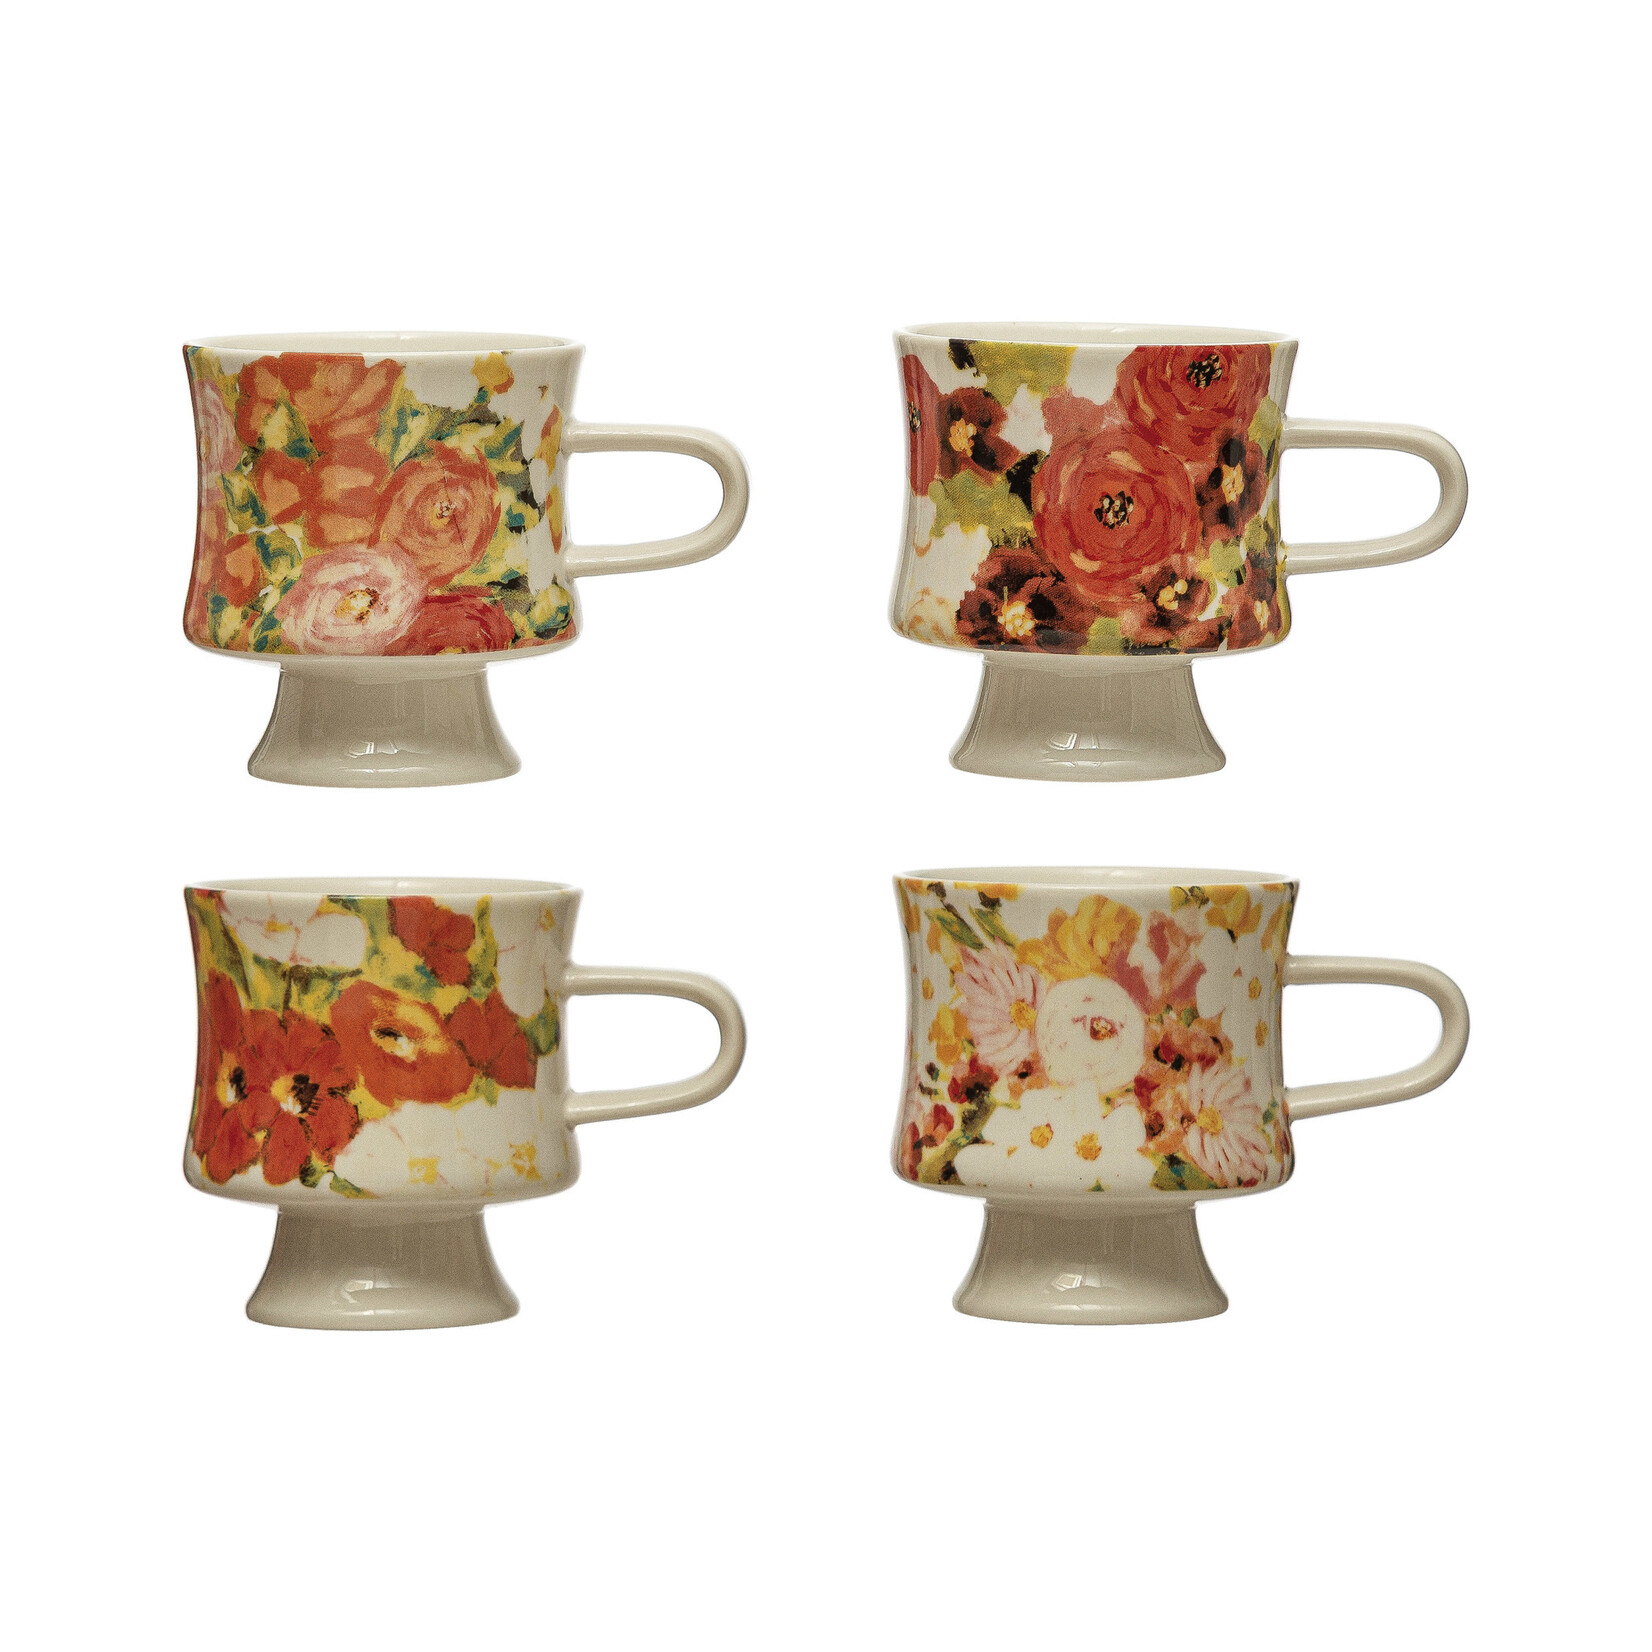 Household Mug Footed Floral